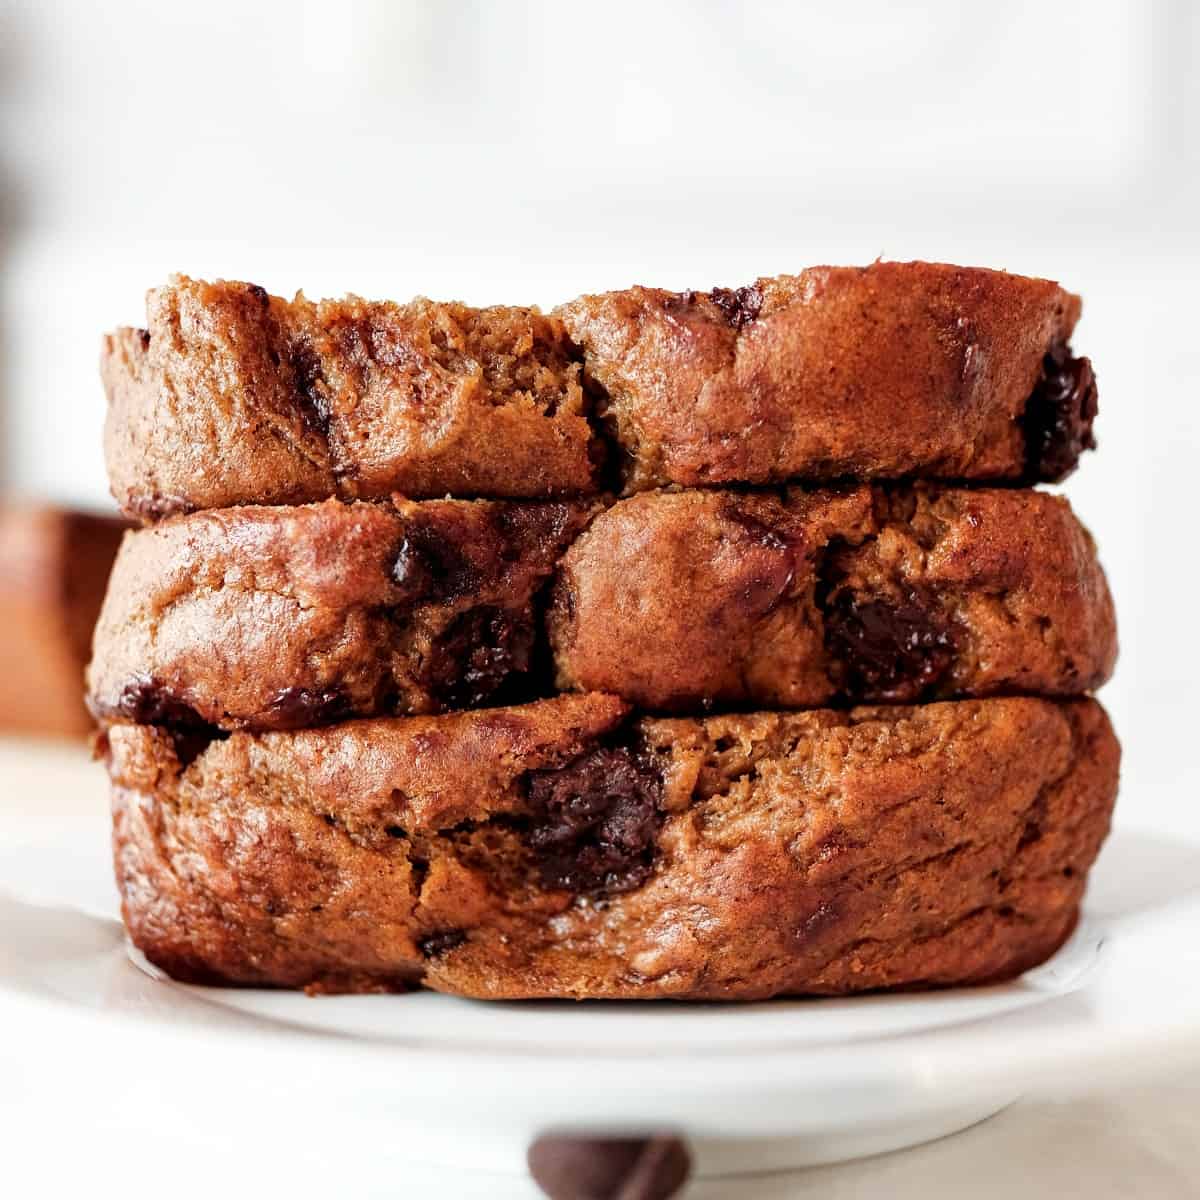 Front view of three stacked slices of chocolate chip banana bread filling the frame.